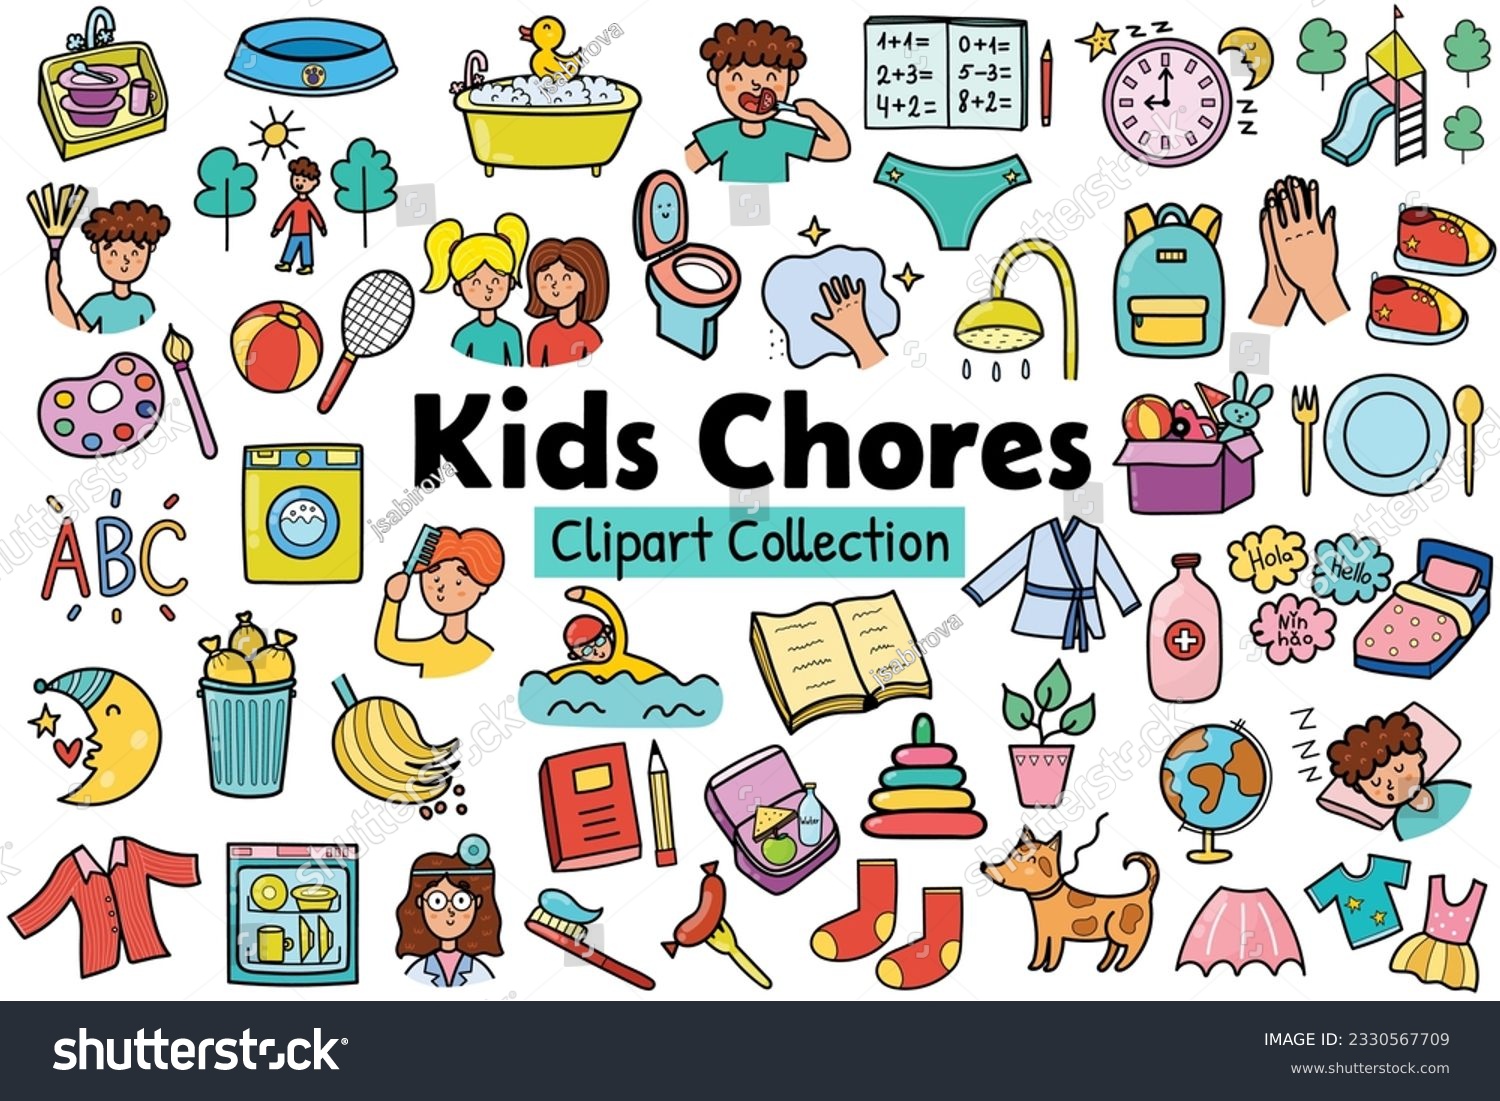 Kids chores clipart collection. Daily routine icons set. Tasks stickers for creating reward chart. Vector illustration #2330567709